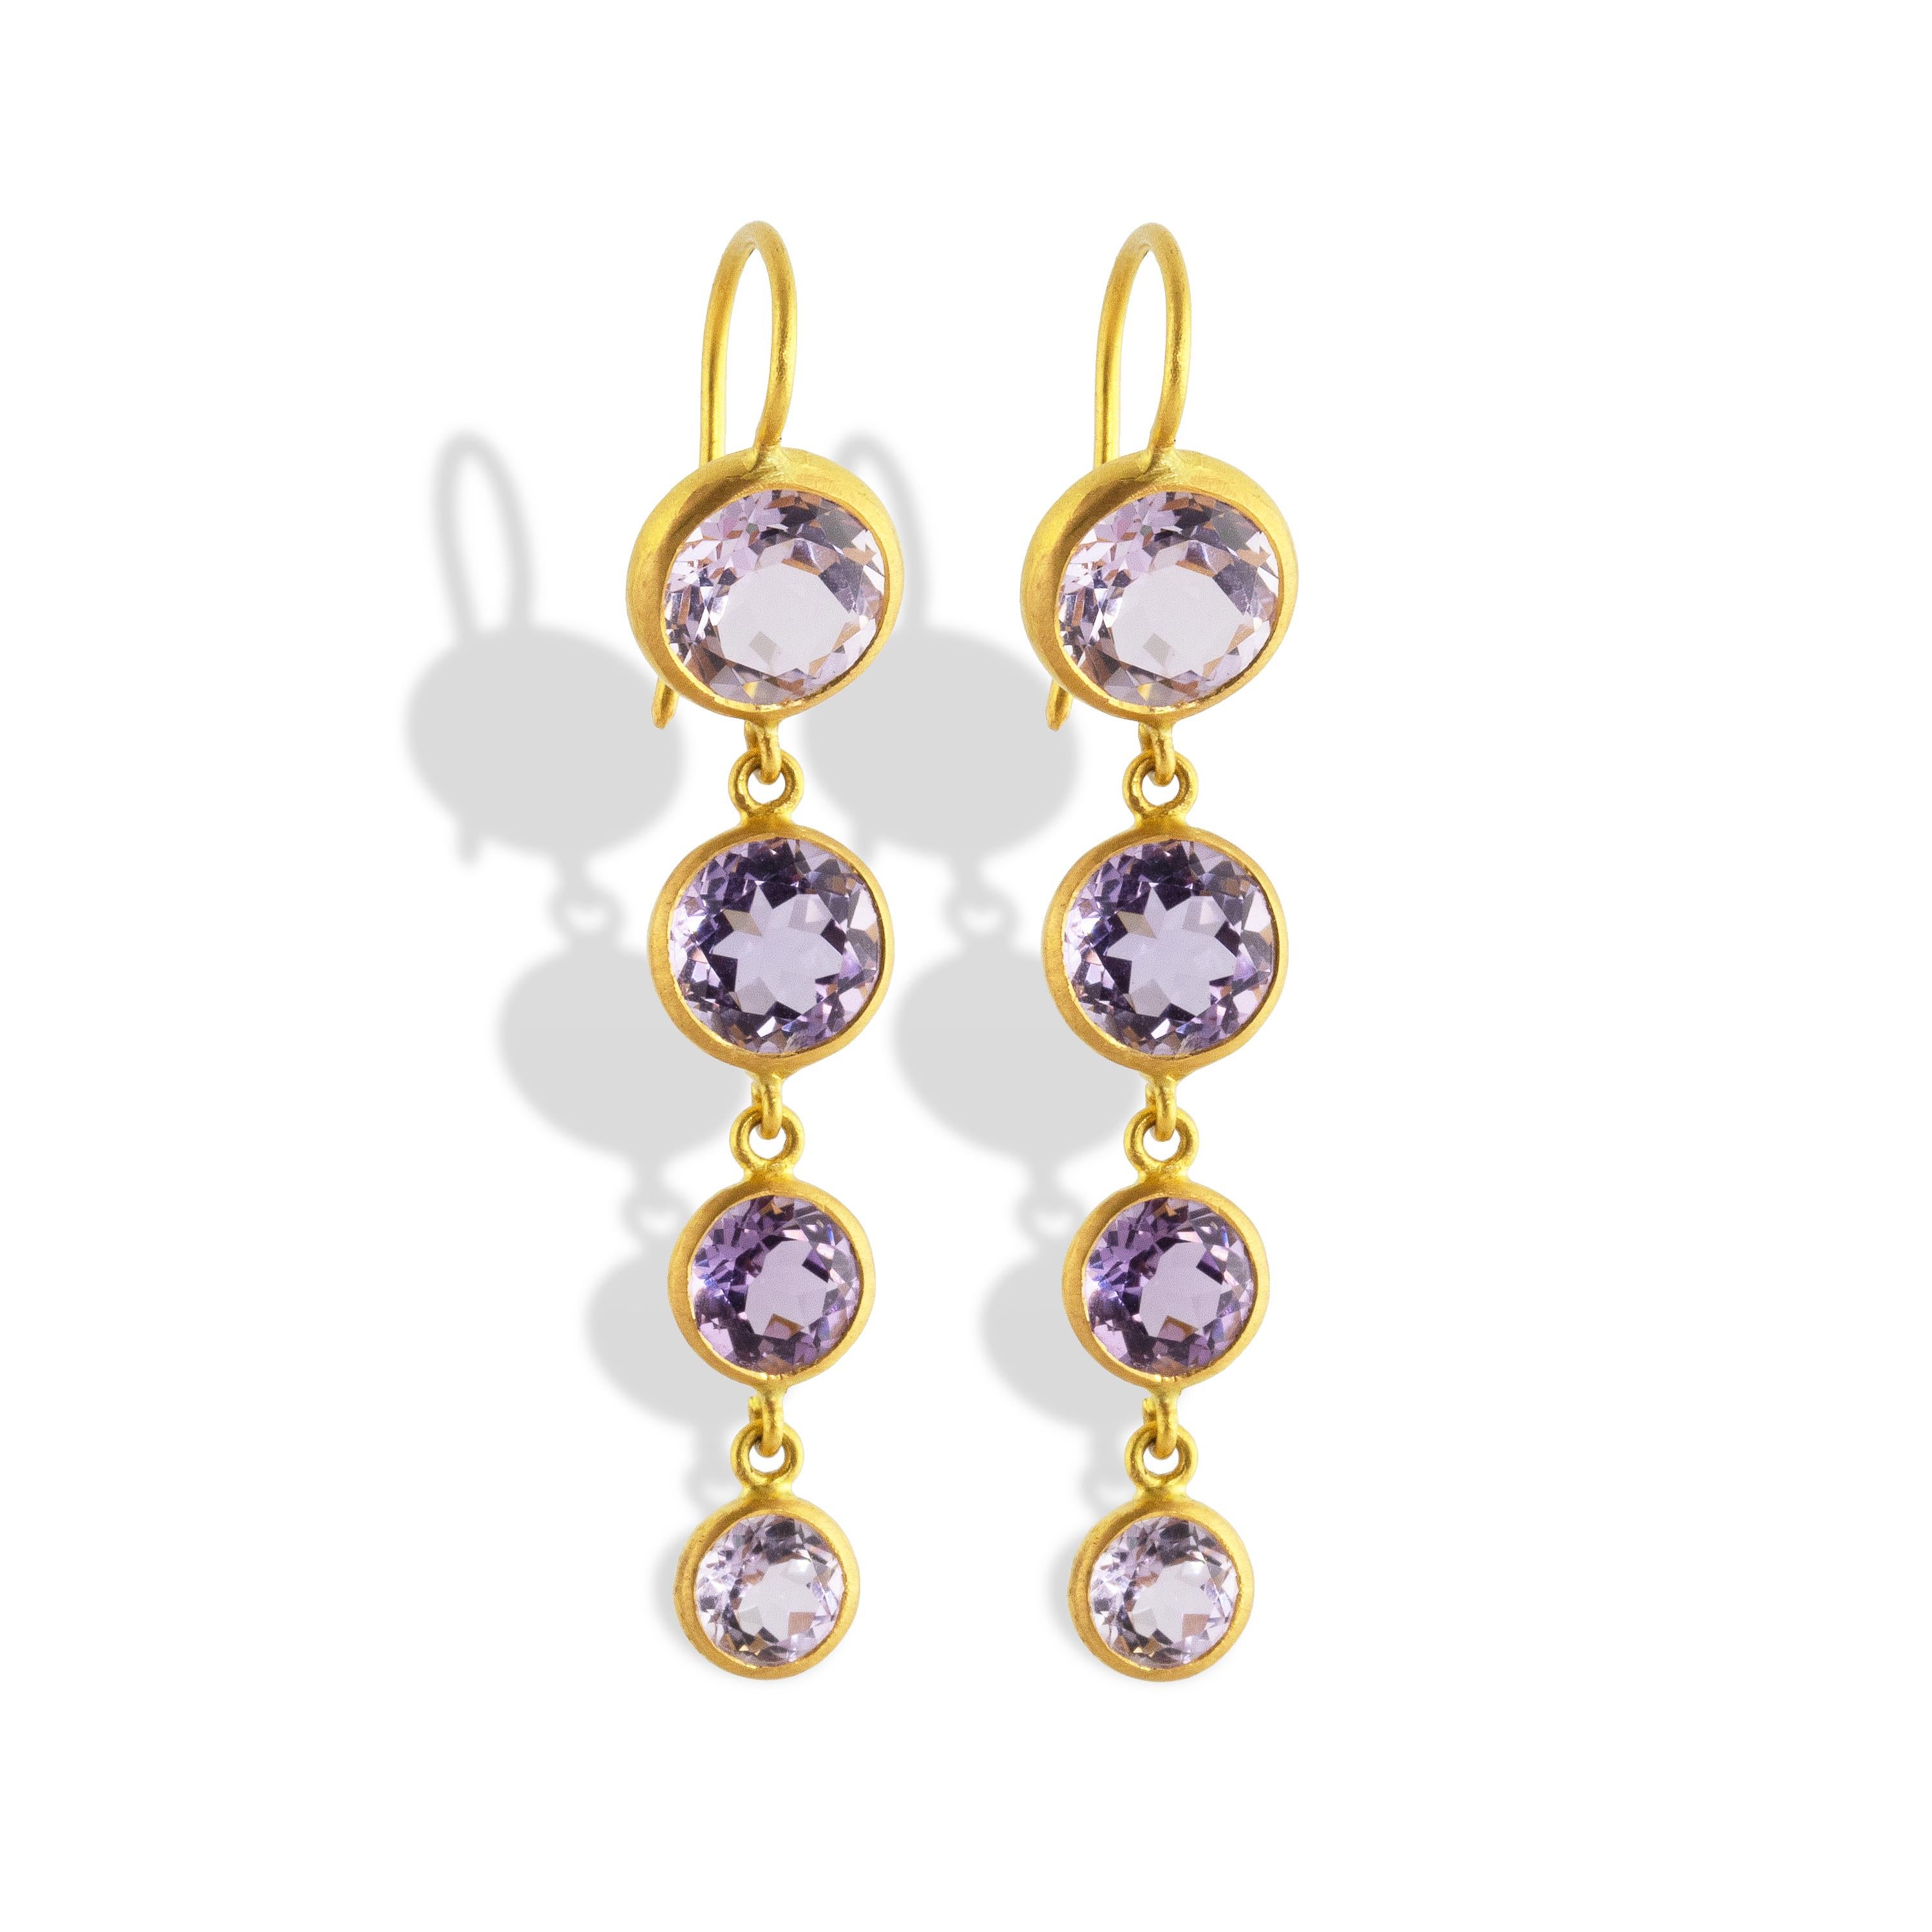 These one of a kind, sparkling earrings feature 8.14 carats of Brazilian Amethyst faceted round gemstones set in 22k Matte Yellow Gold.  A delicate drop of four drops highlight the soft violet color of the gems.  

Amethyst served royalty throughout